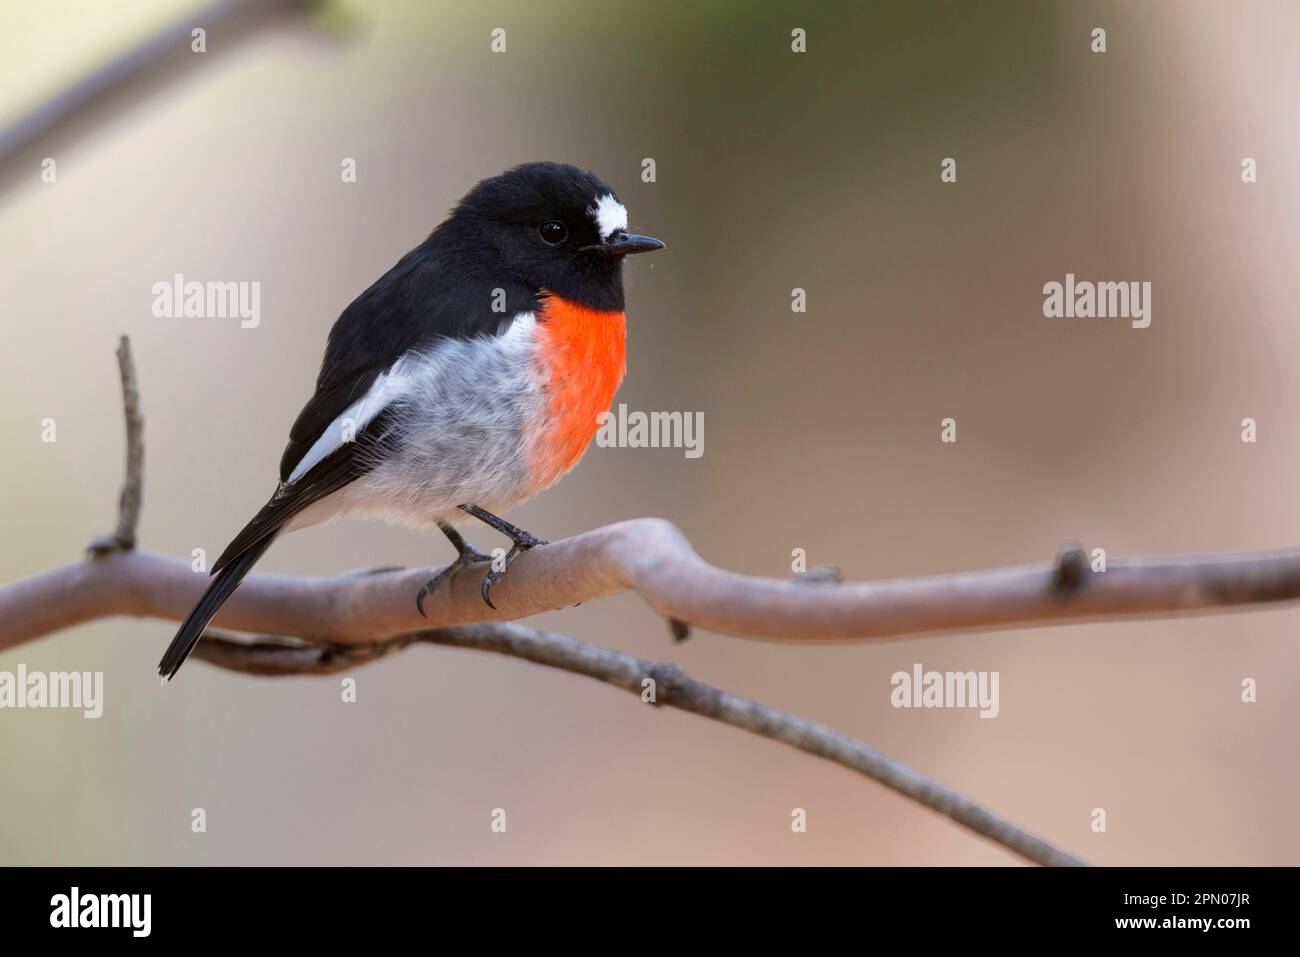 South tralia, scarlet robin (Petroica boodang), songbirds, animals, birds, Scarlet Robin adult male, perched on twig, Kangaroo Island Stock Photo